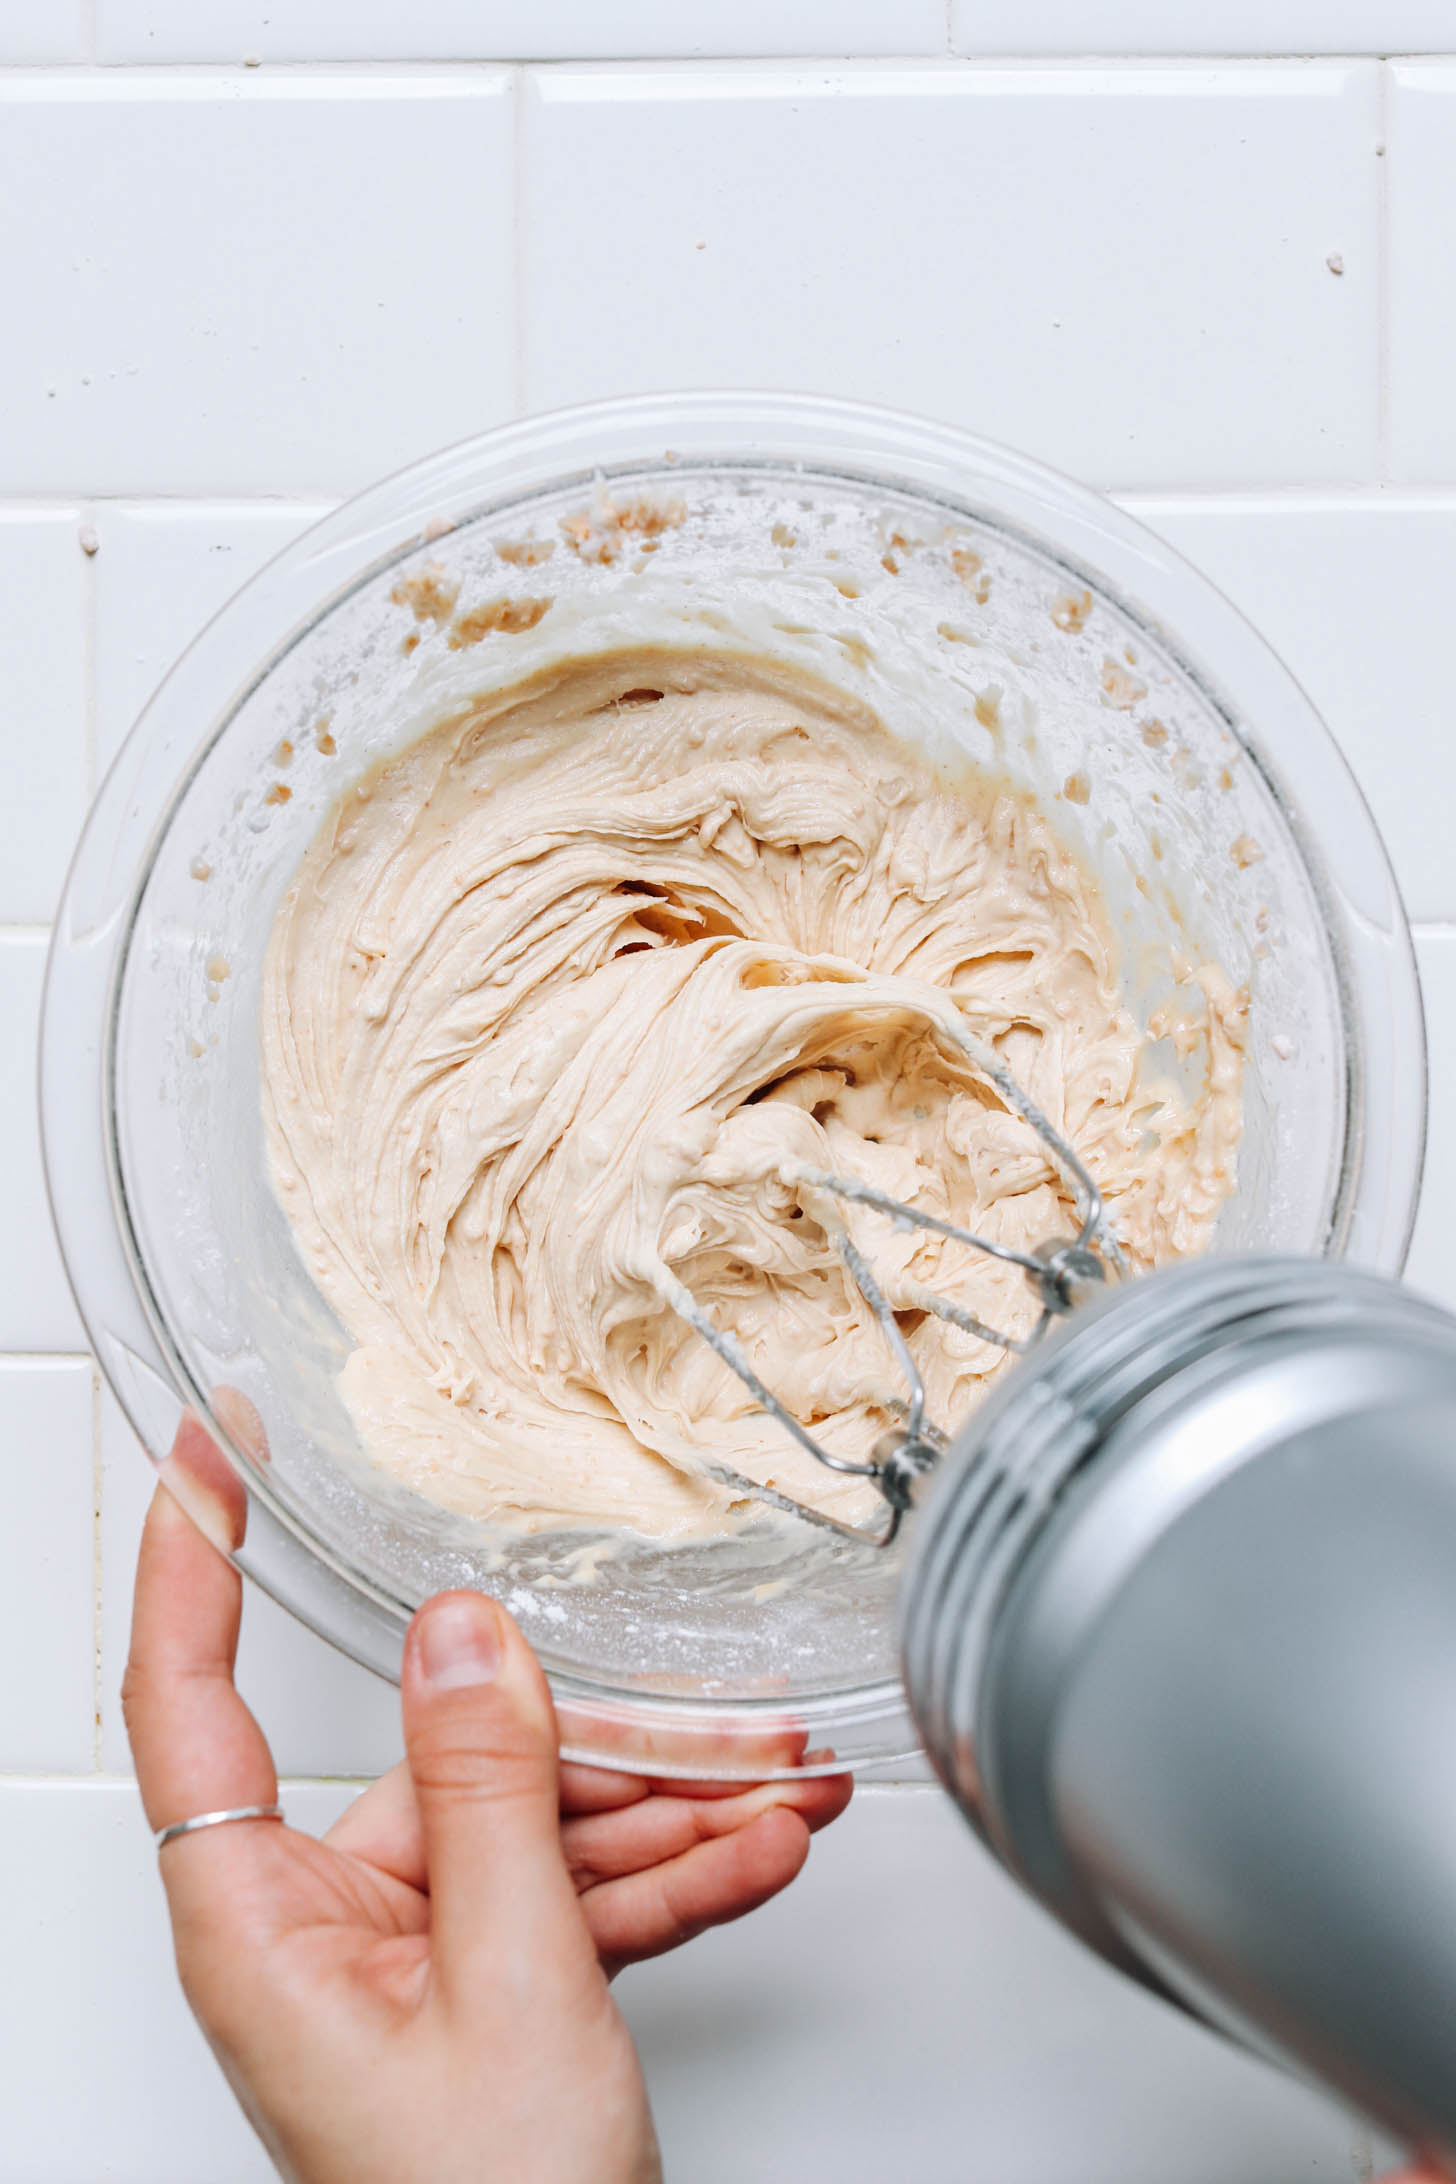 Using a hand mixer to make fluffy vegan peanut butter frosting